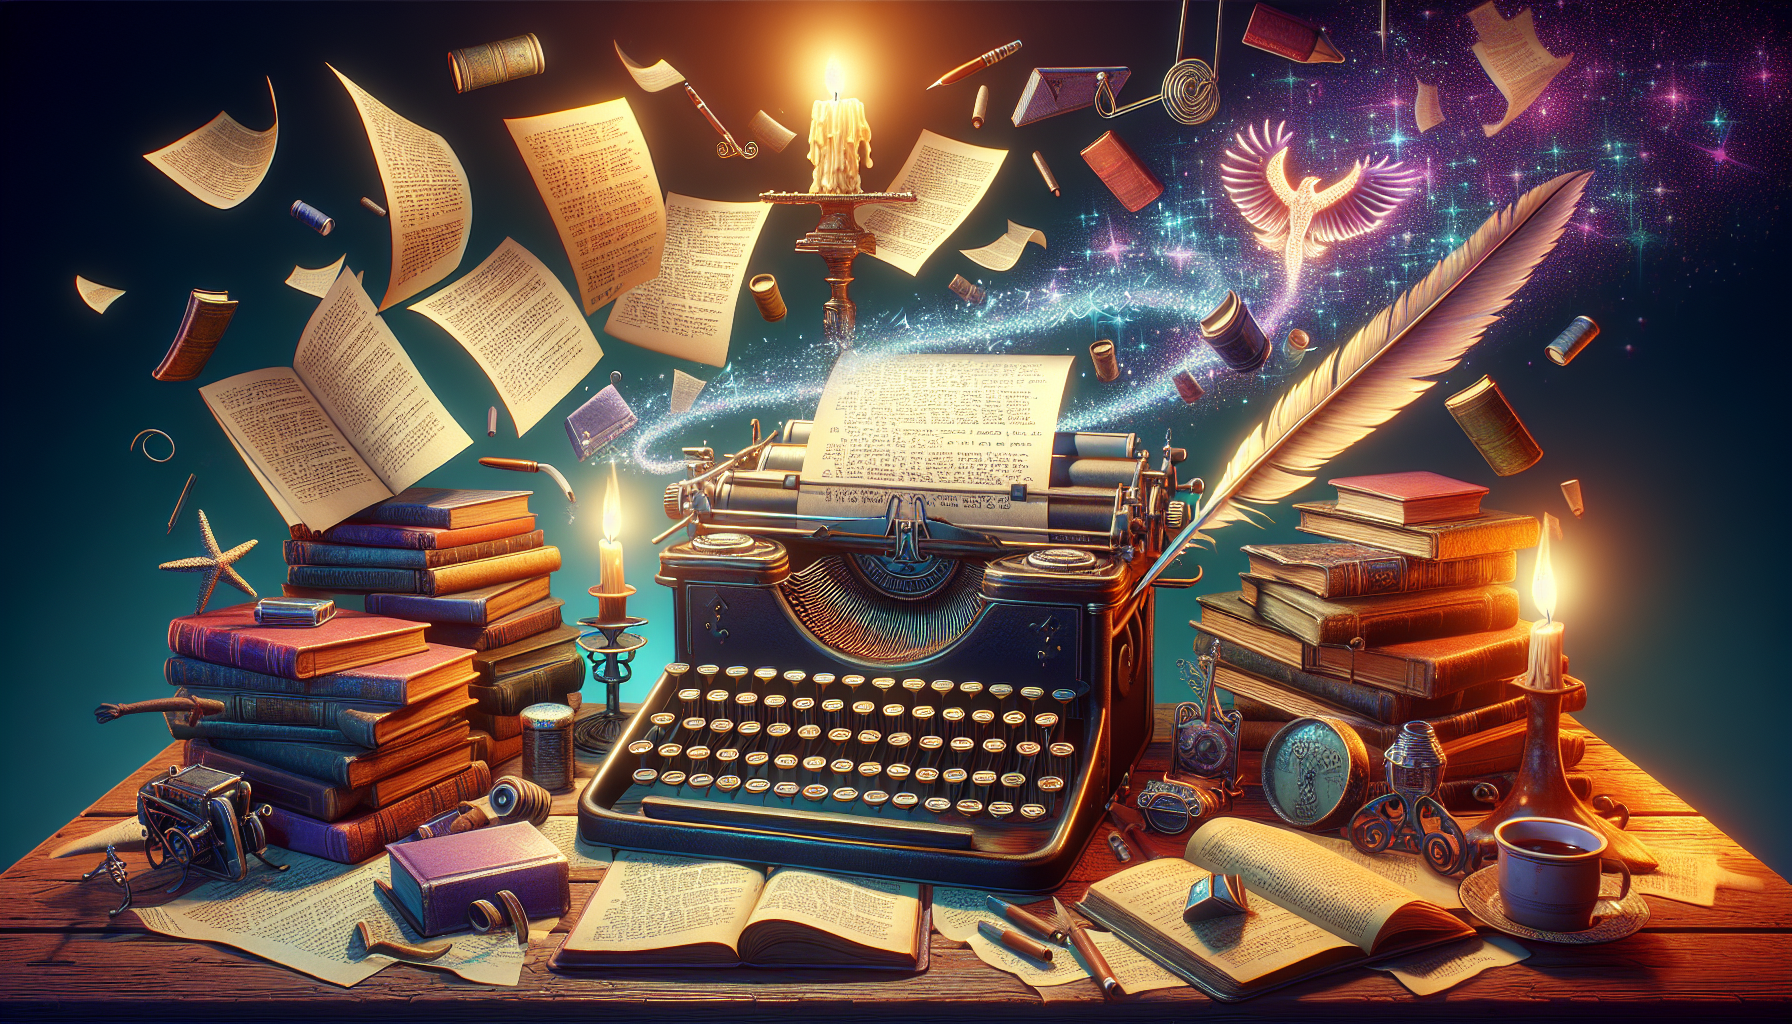 An enchanted vintage typewriter surrounded by floating books, glowing script pages, and magical quills, set in a cozy, dimly lit writer's study filled with stacks of classics and a flickering candle, conveying a mystical atmosphere dedicated to the craft of screenwriting.